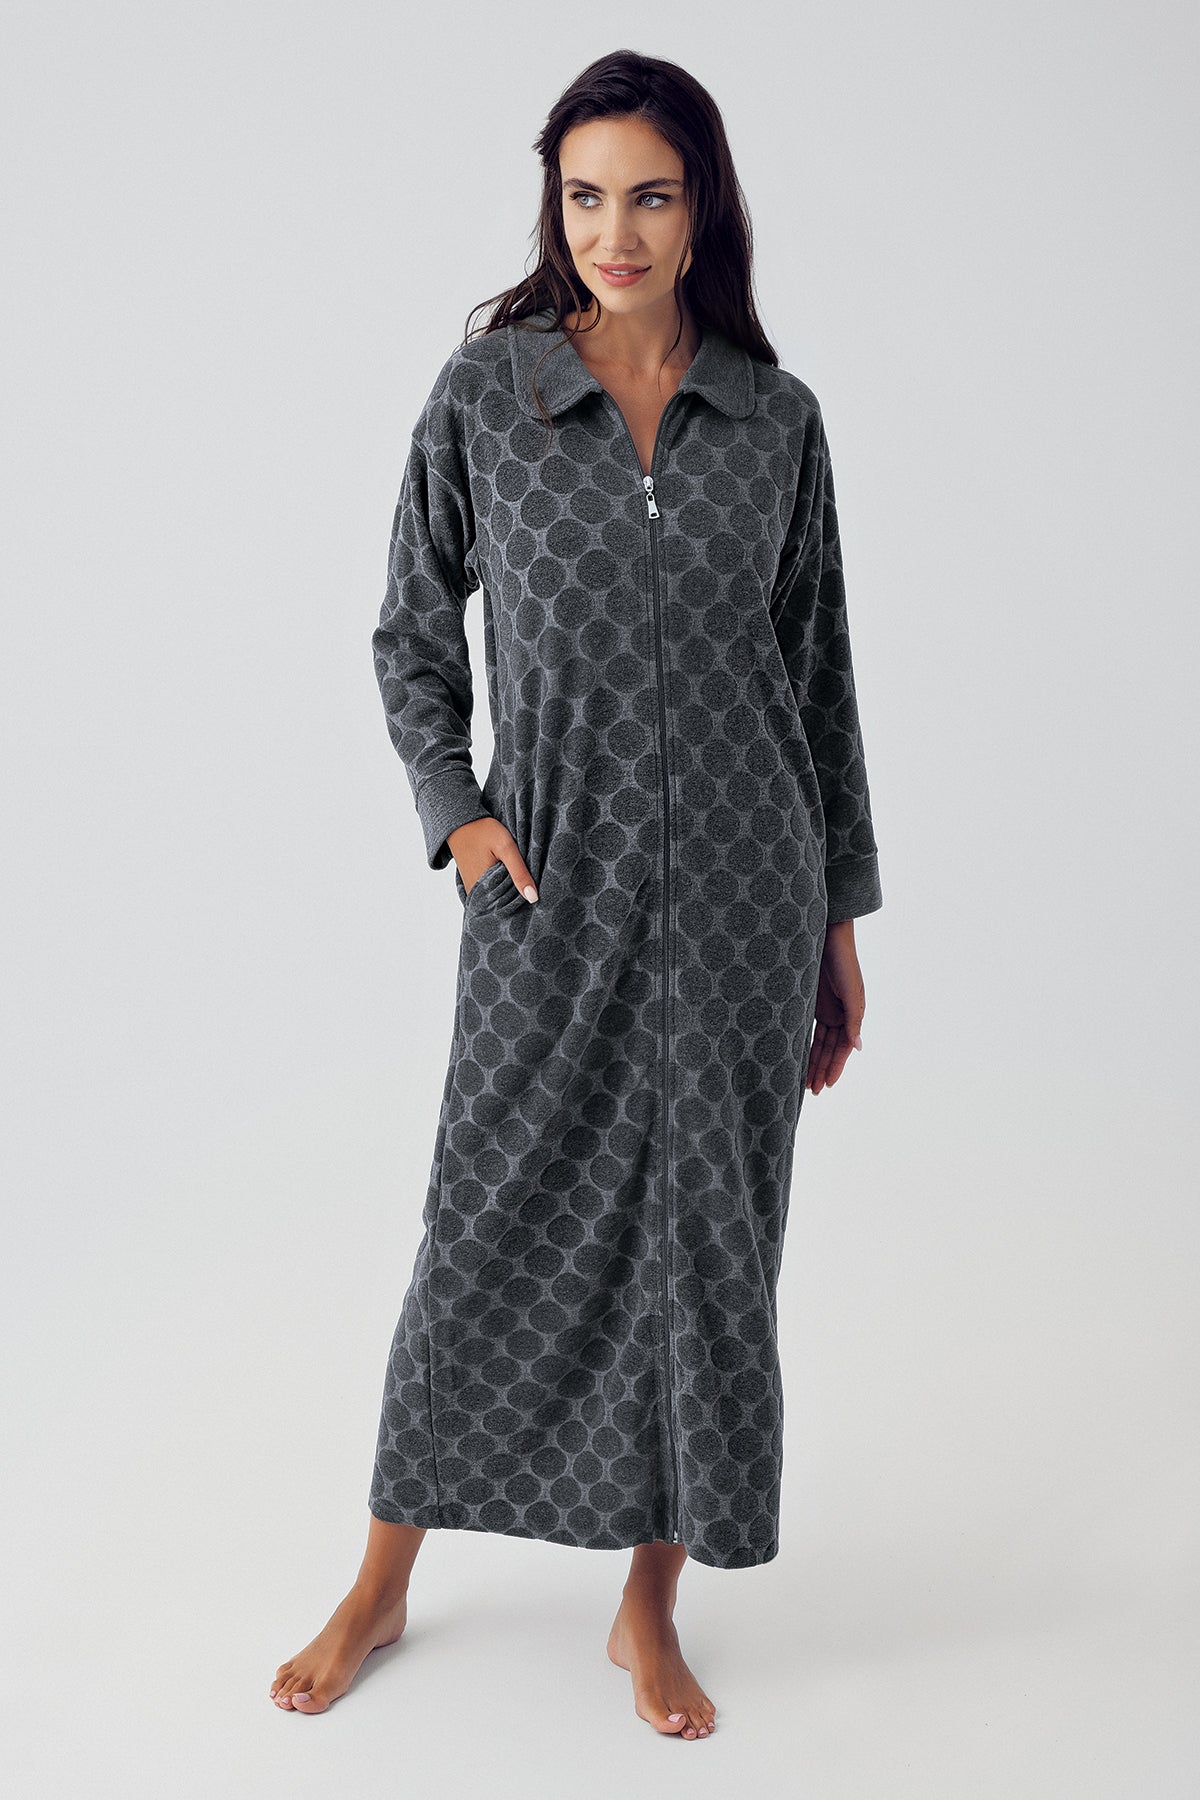 Terry Jacquard Maternity & Nursing Nightgown Anthracite - 15100